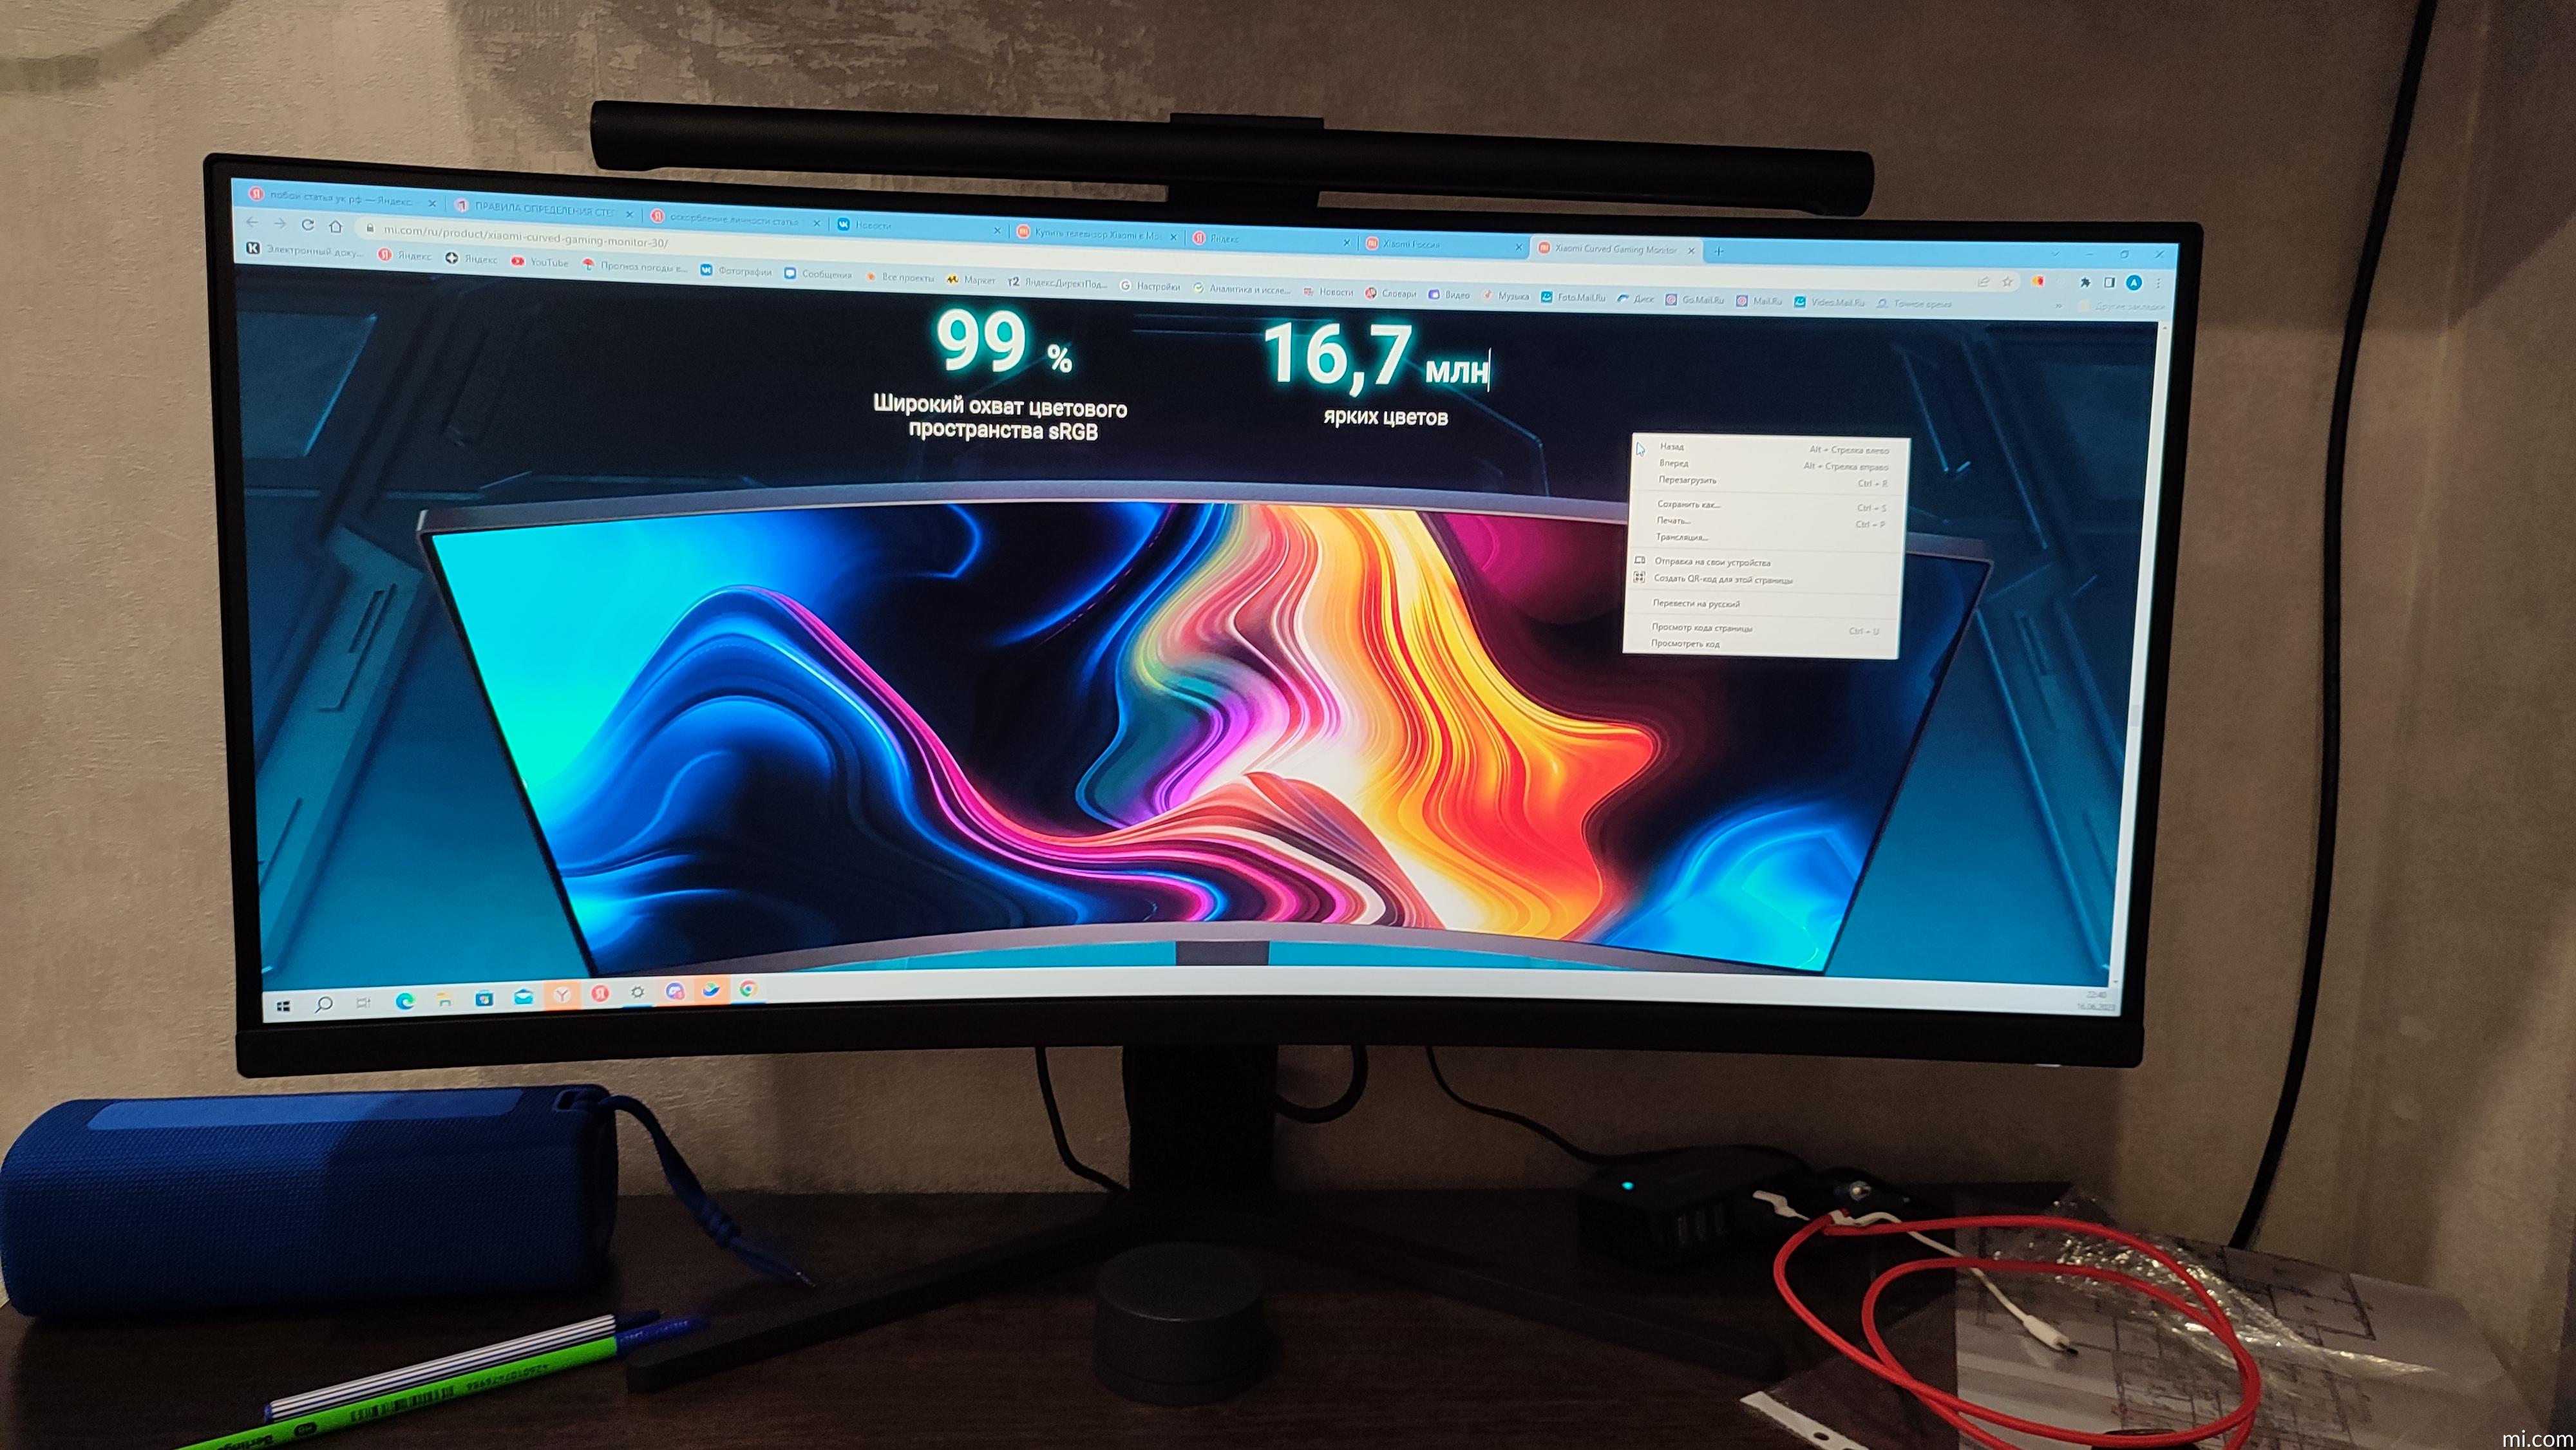 Xiaomi Mi Curved Gaming Monitor - 30 pouces